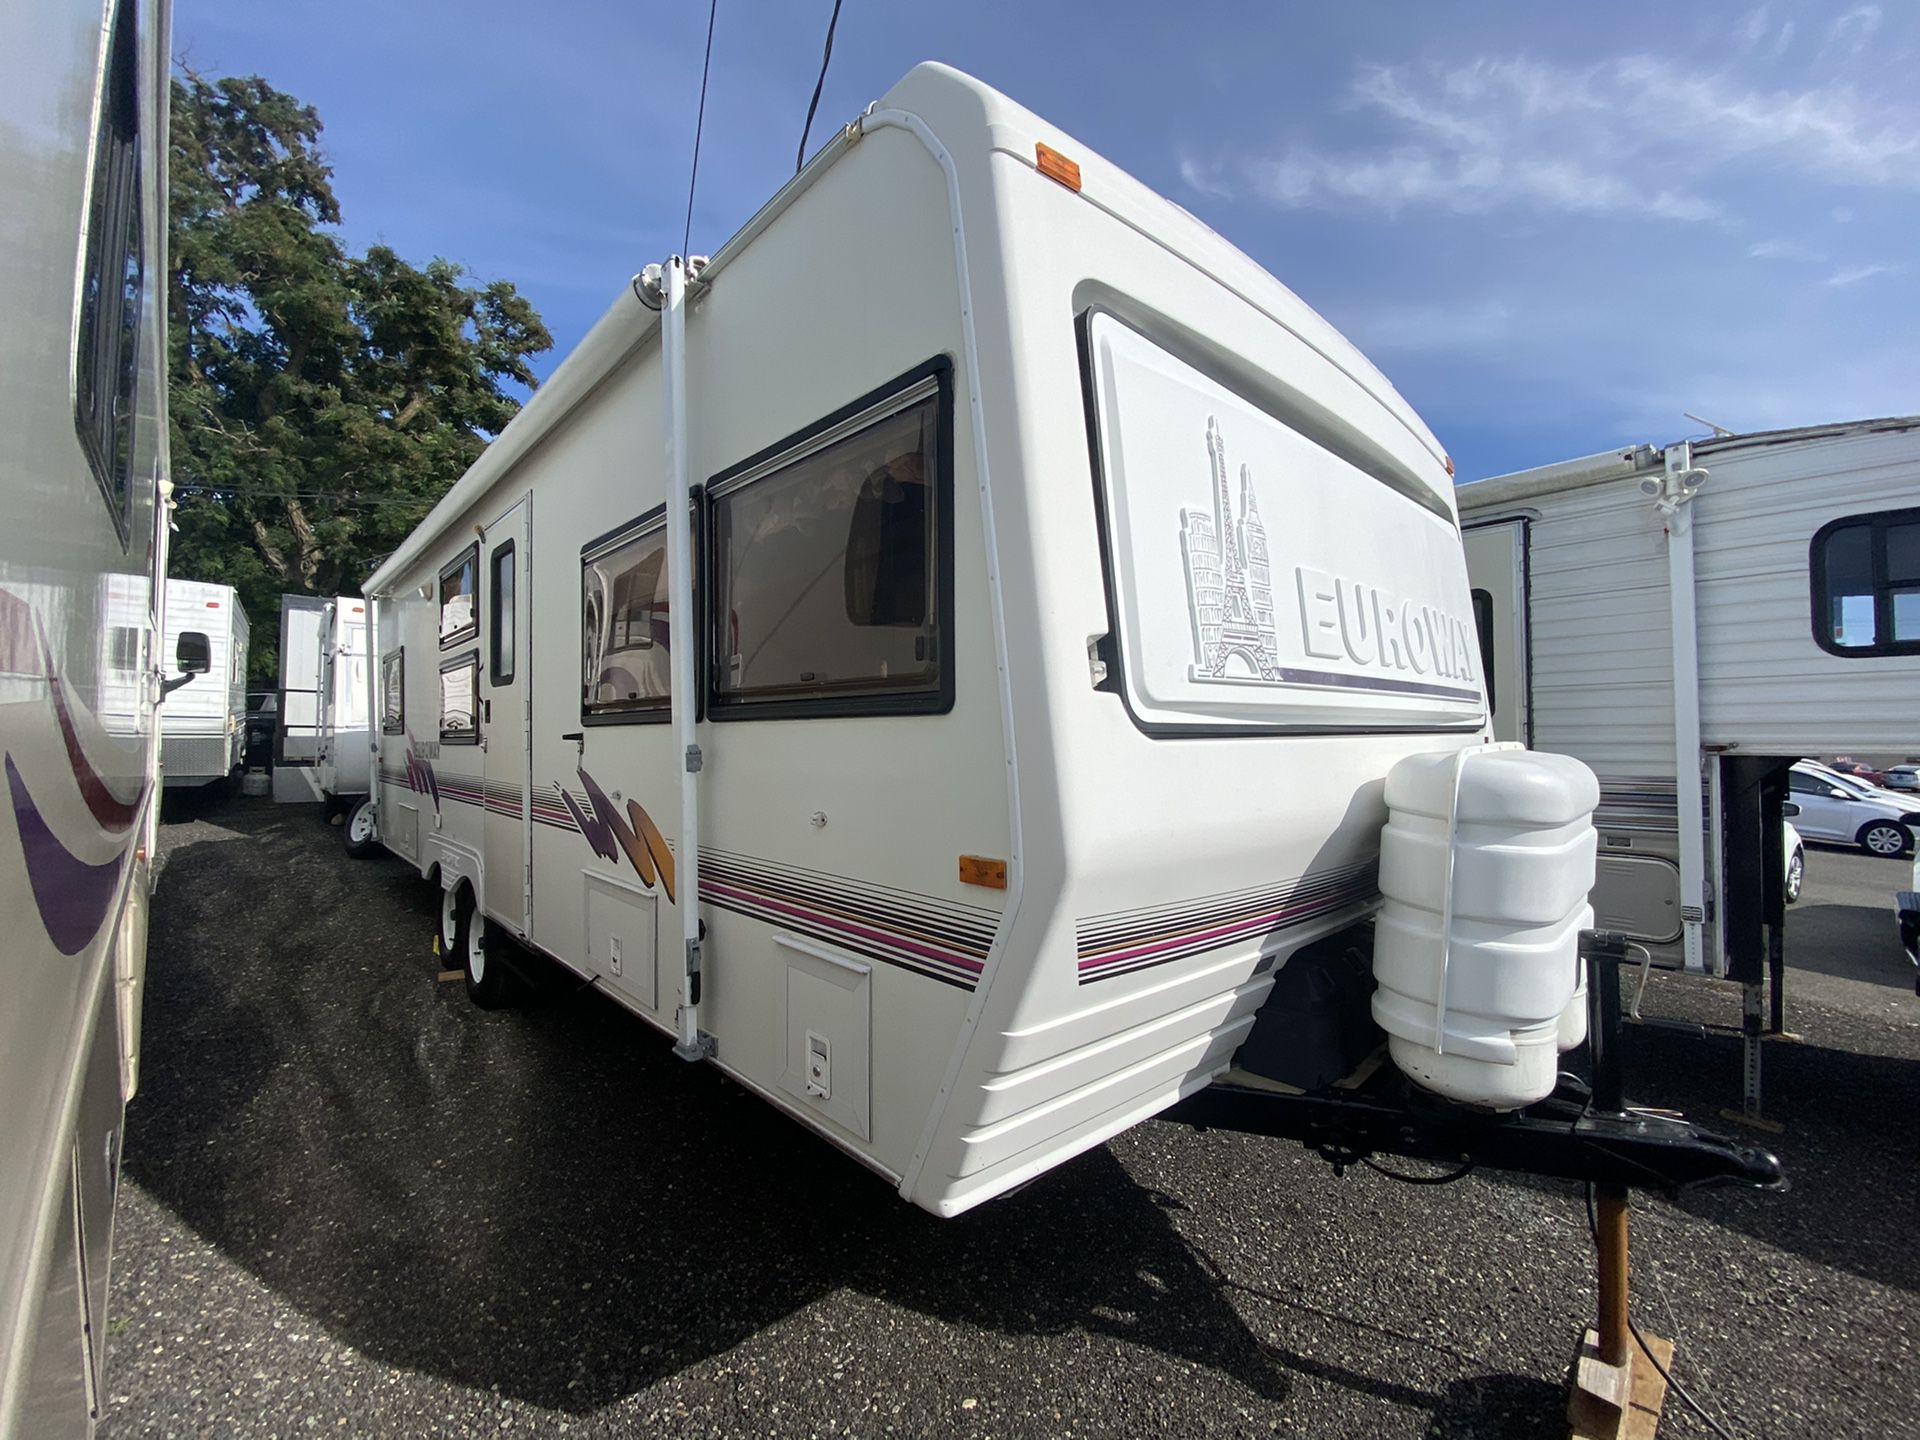 1997 Euro Camper by Fleetwood 26ft Travel Trailer A/c Awning Sleeps 6-8